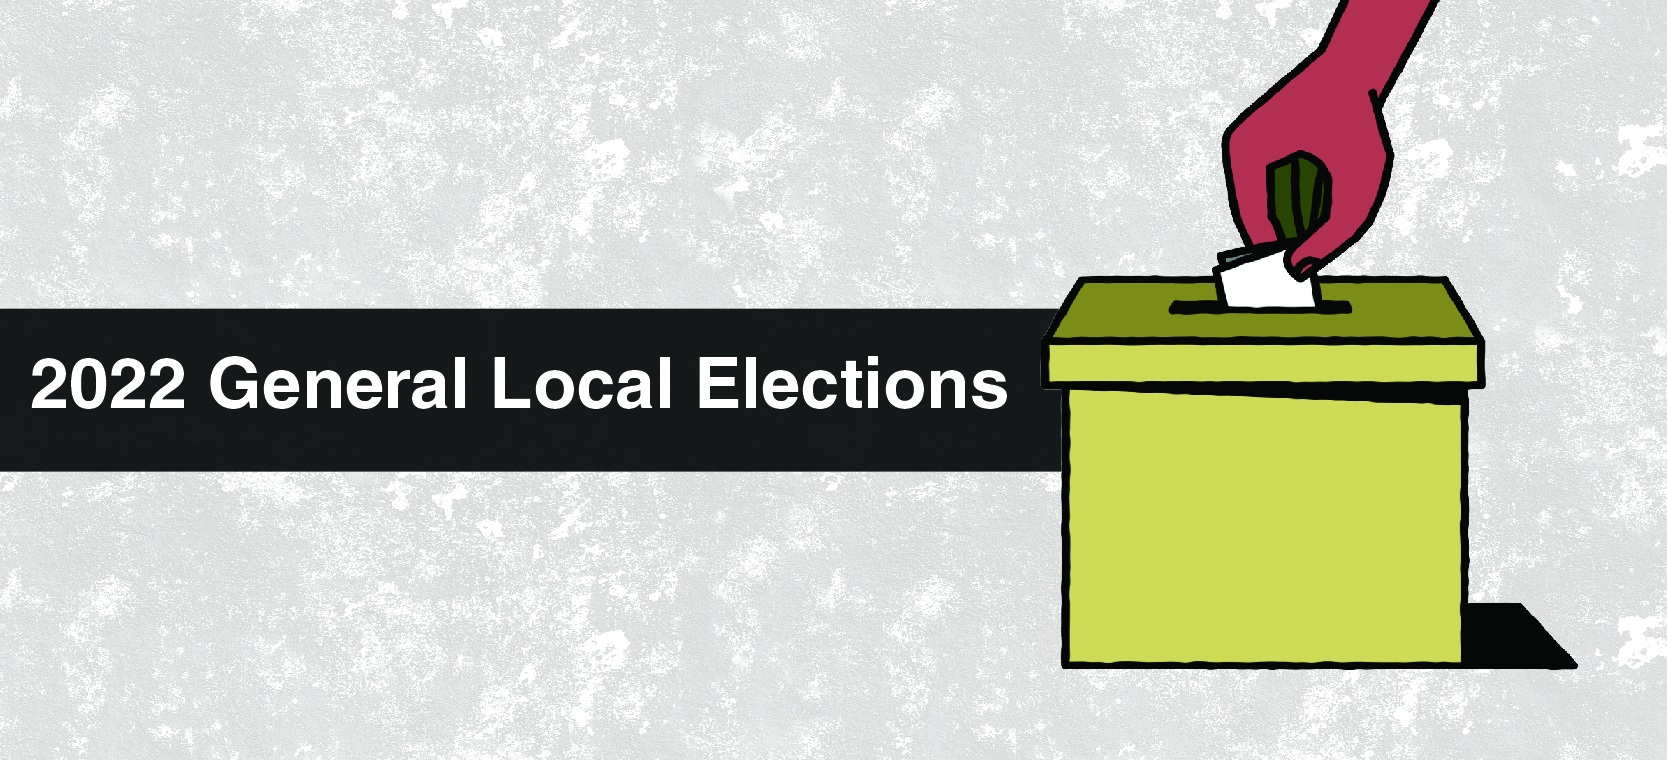 Disclosure statements of candidates, elector organizations and third party advertising sponsors in the 2022 General Local Elections are now available.